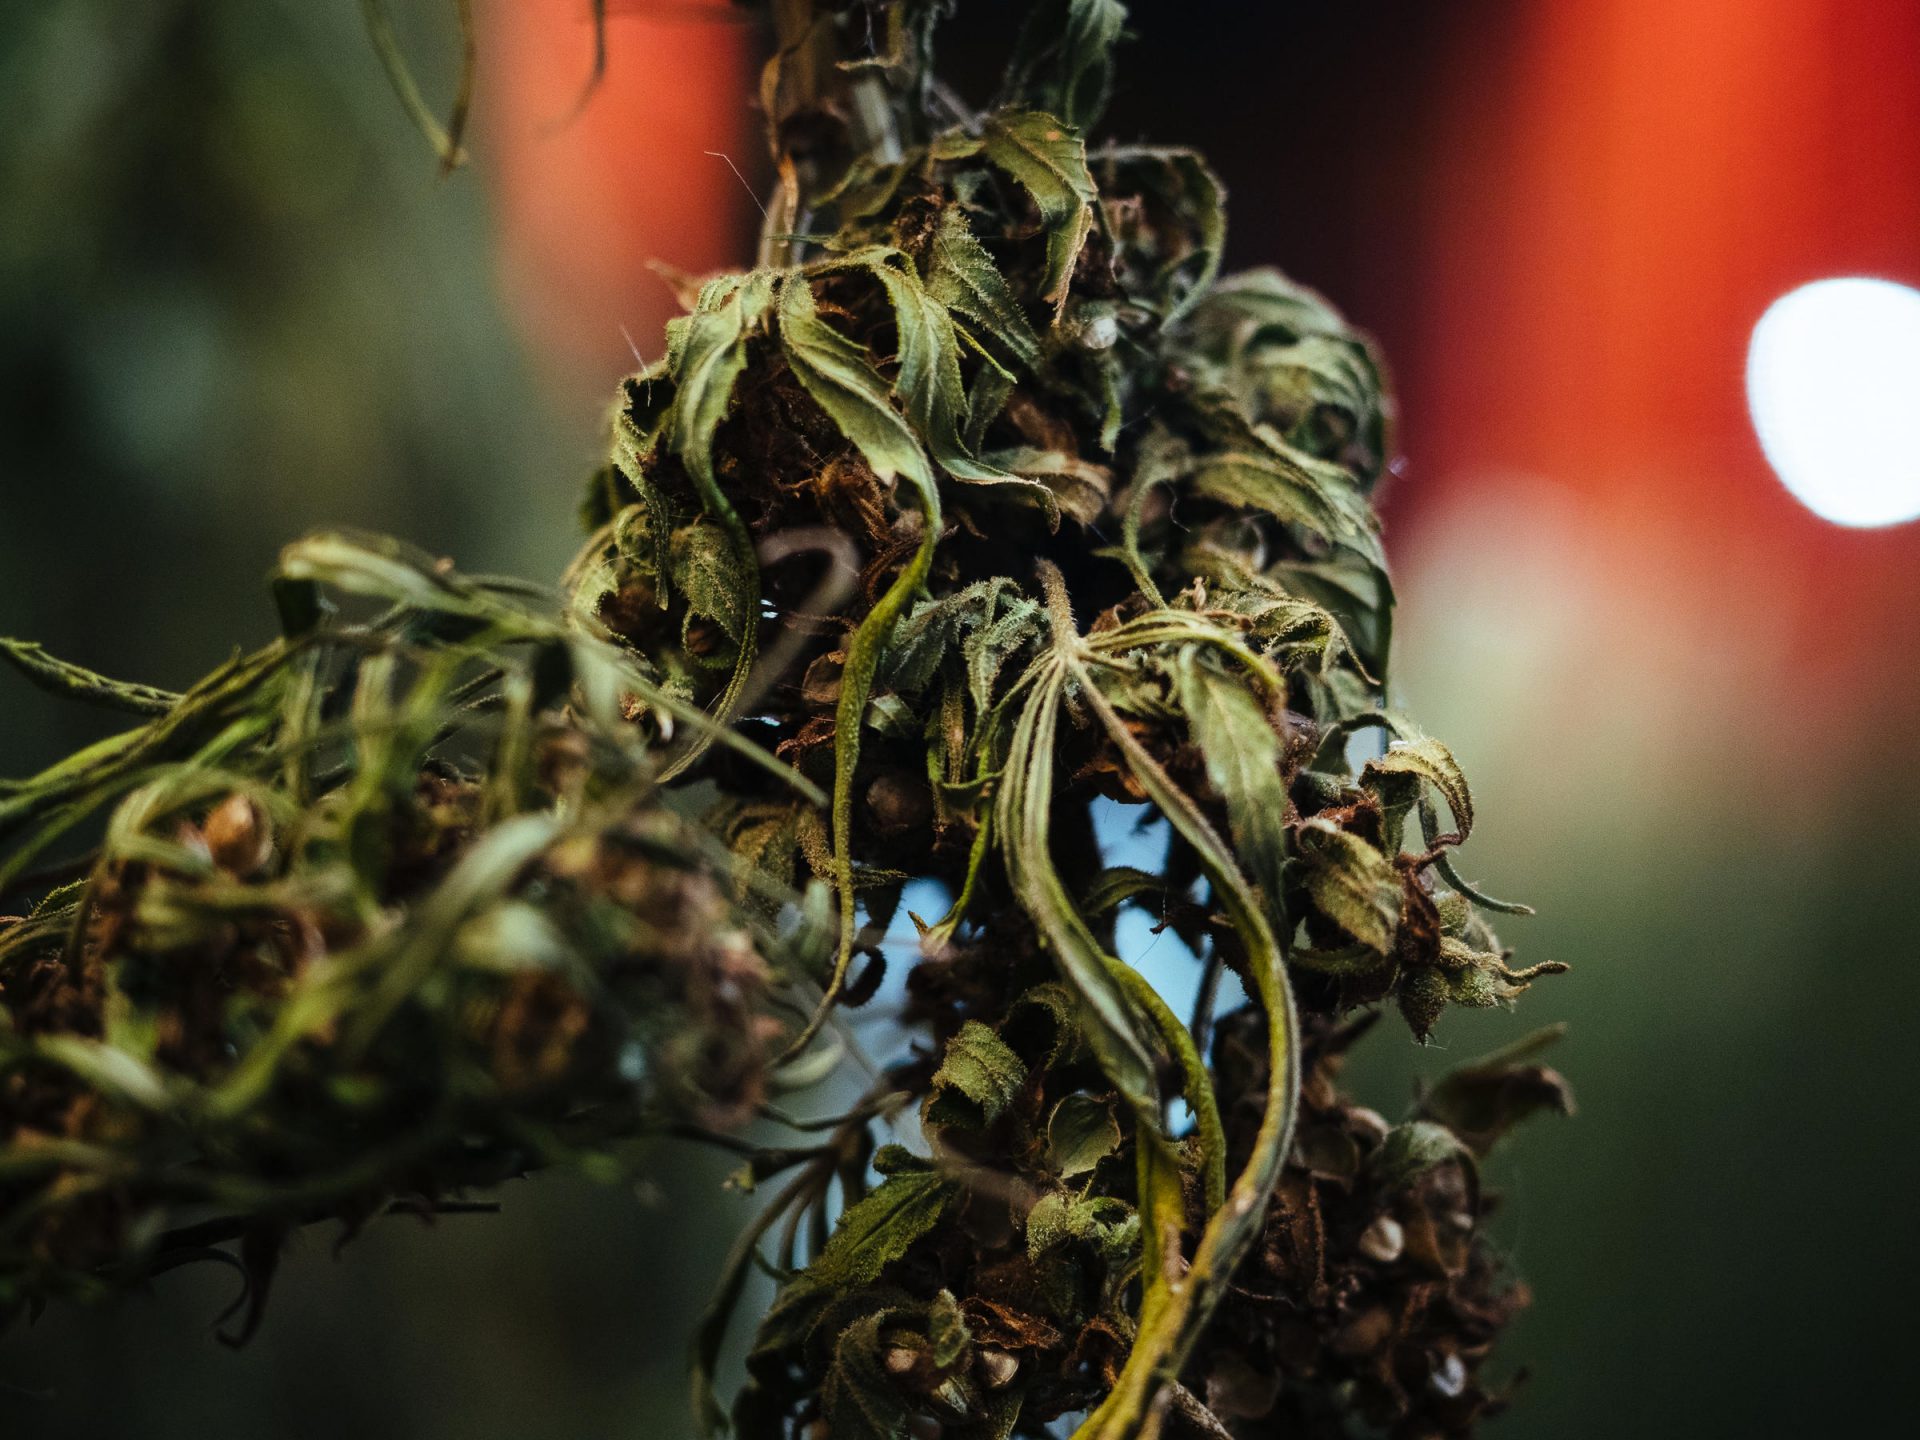 A drying hemp plant at AgraPharm's warehouse in Vanport, Pa.